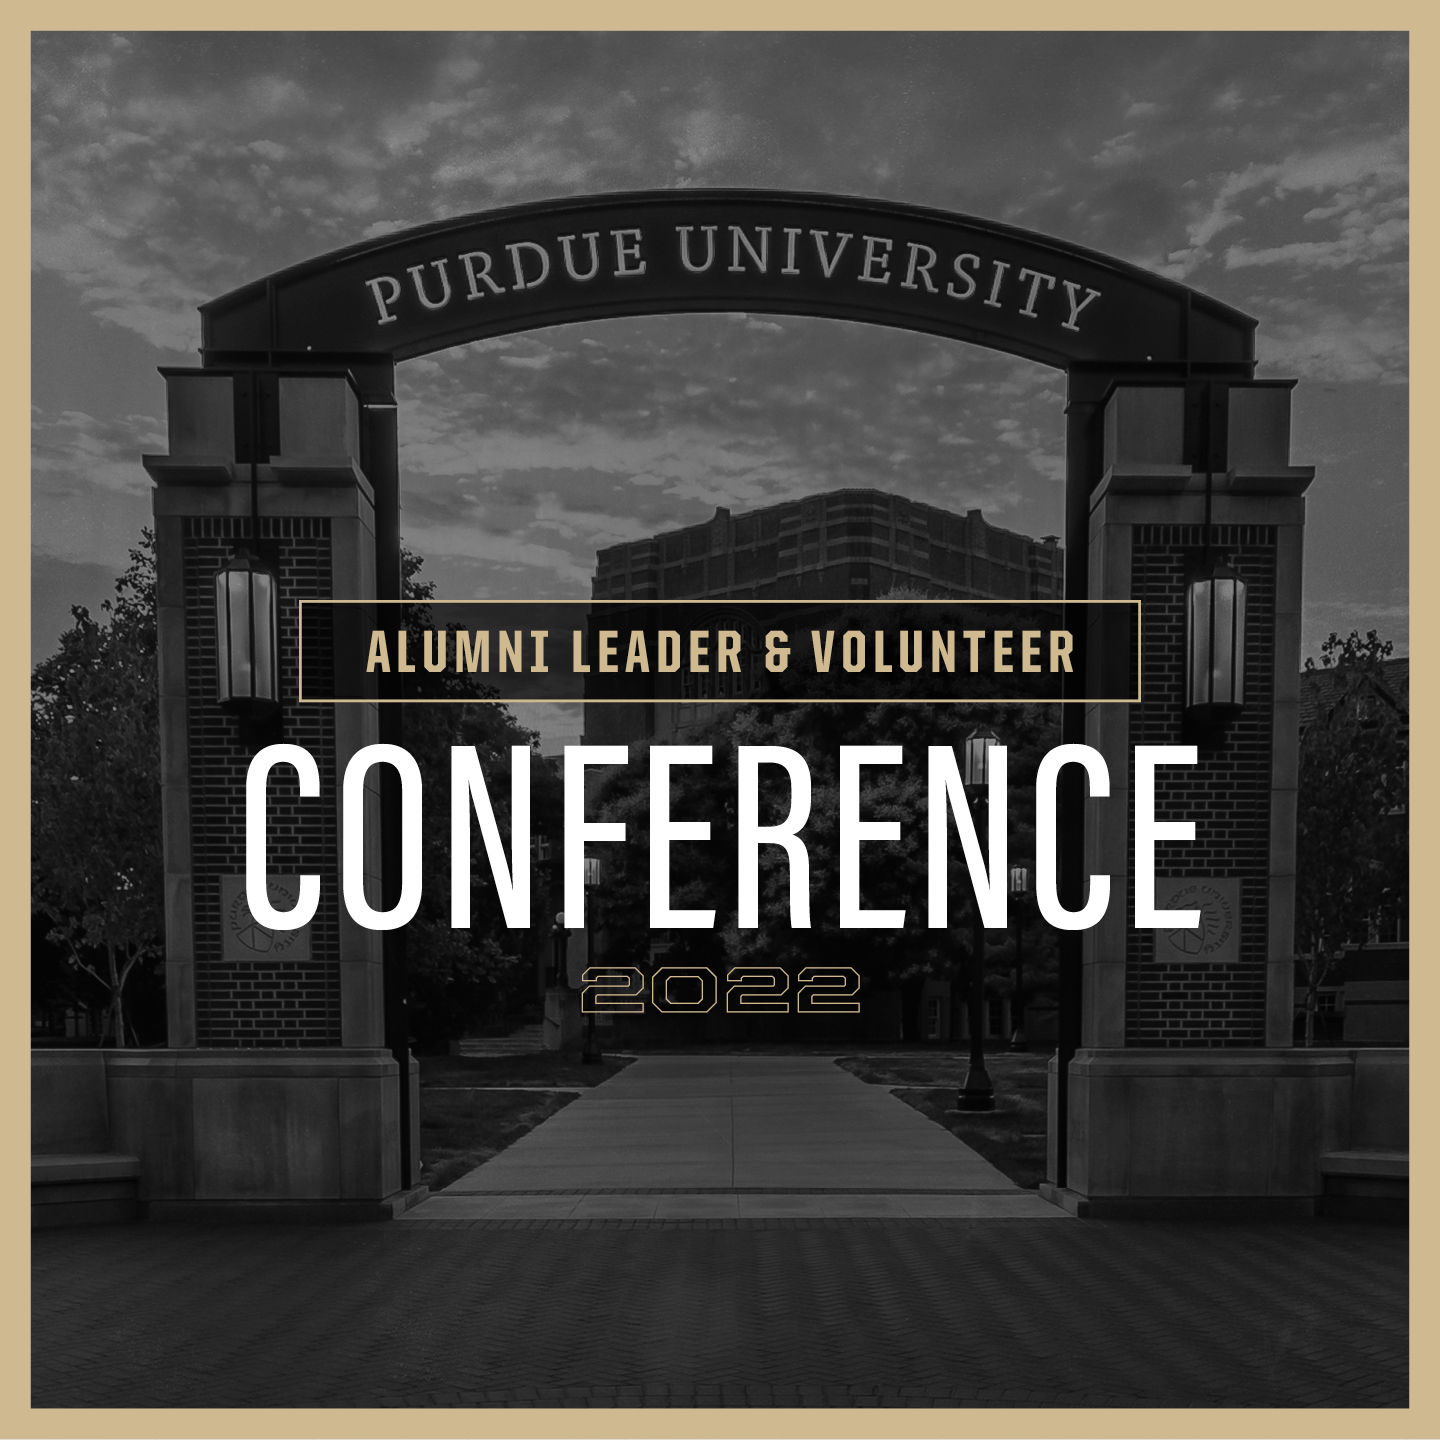 An image showing Purdue Alumni and Volunteer Conference banner. The background shows Purdue University entrance gate!